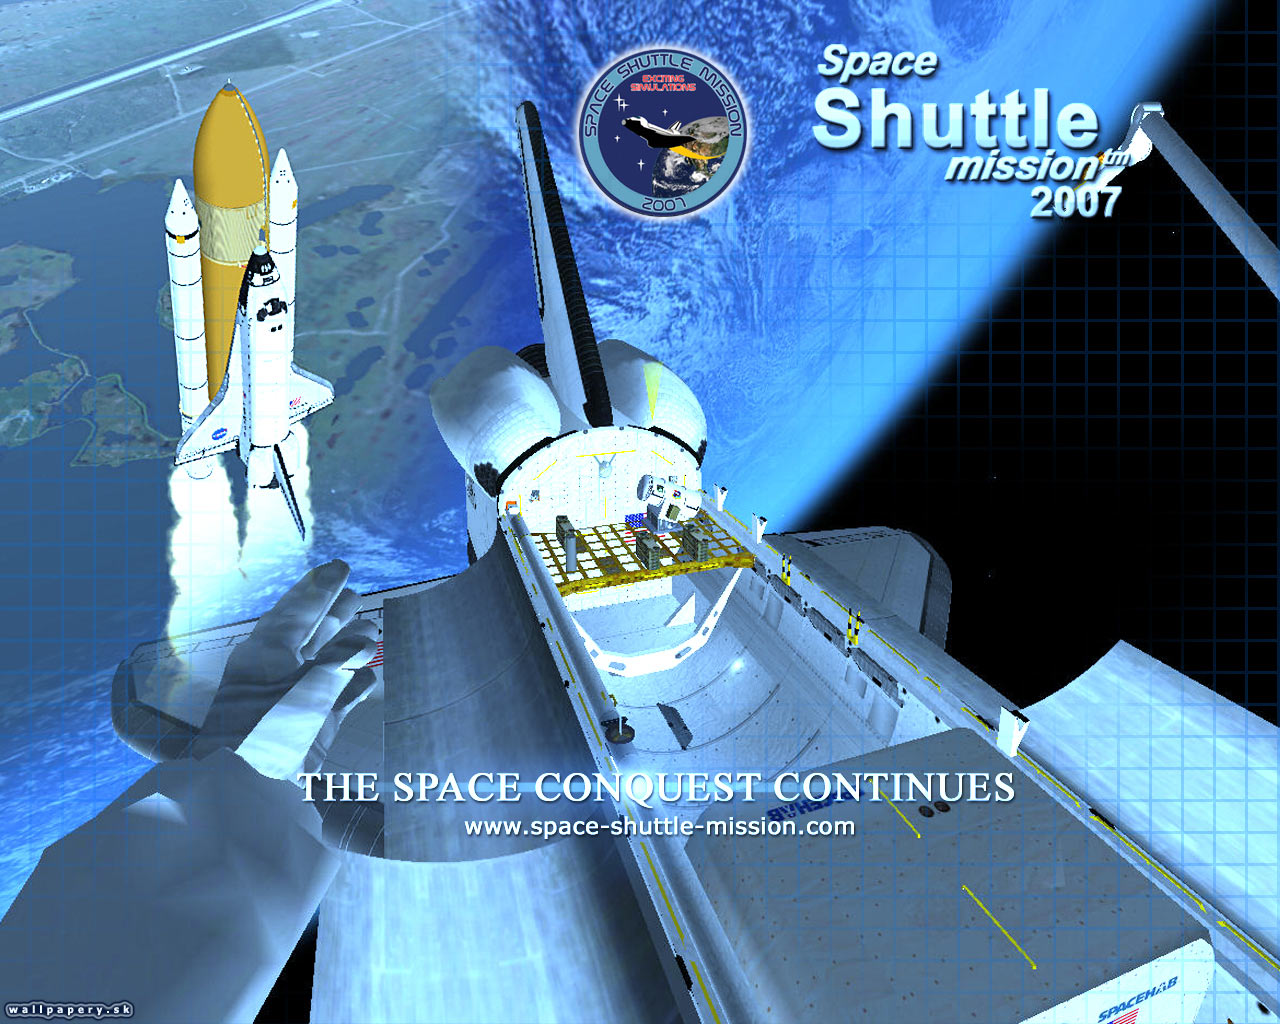 Space Shuttle Mission 2007 - wallpaper 2